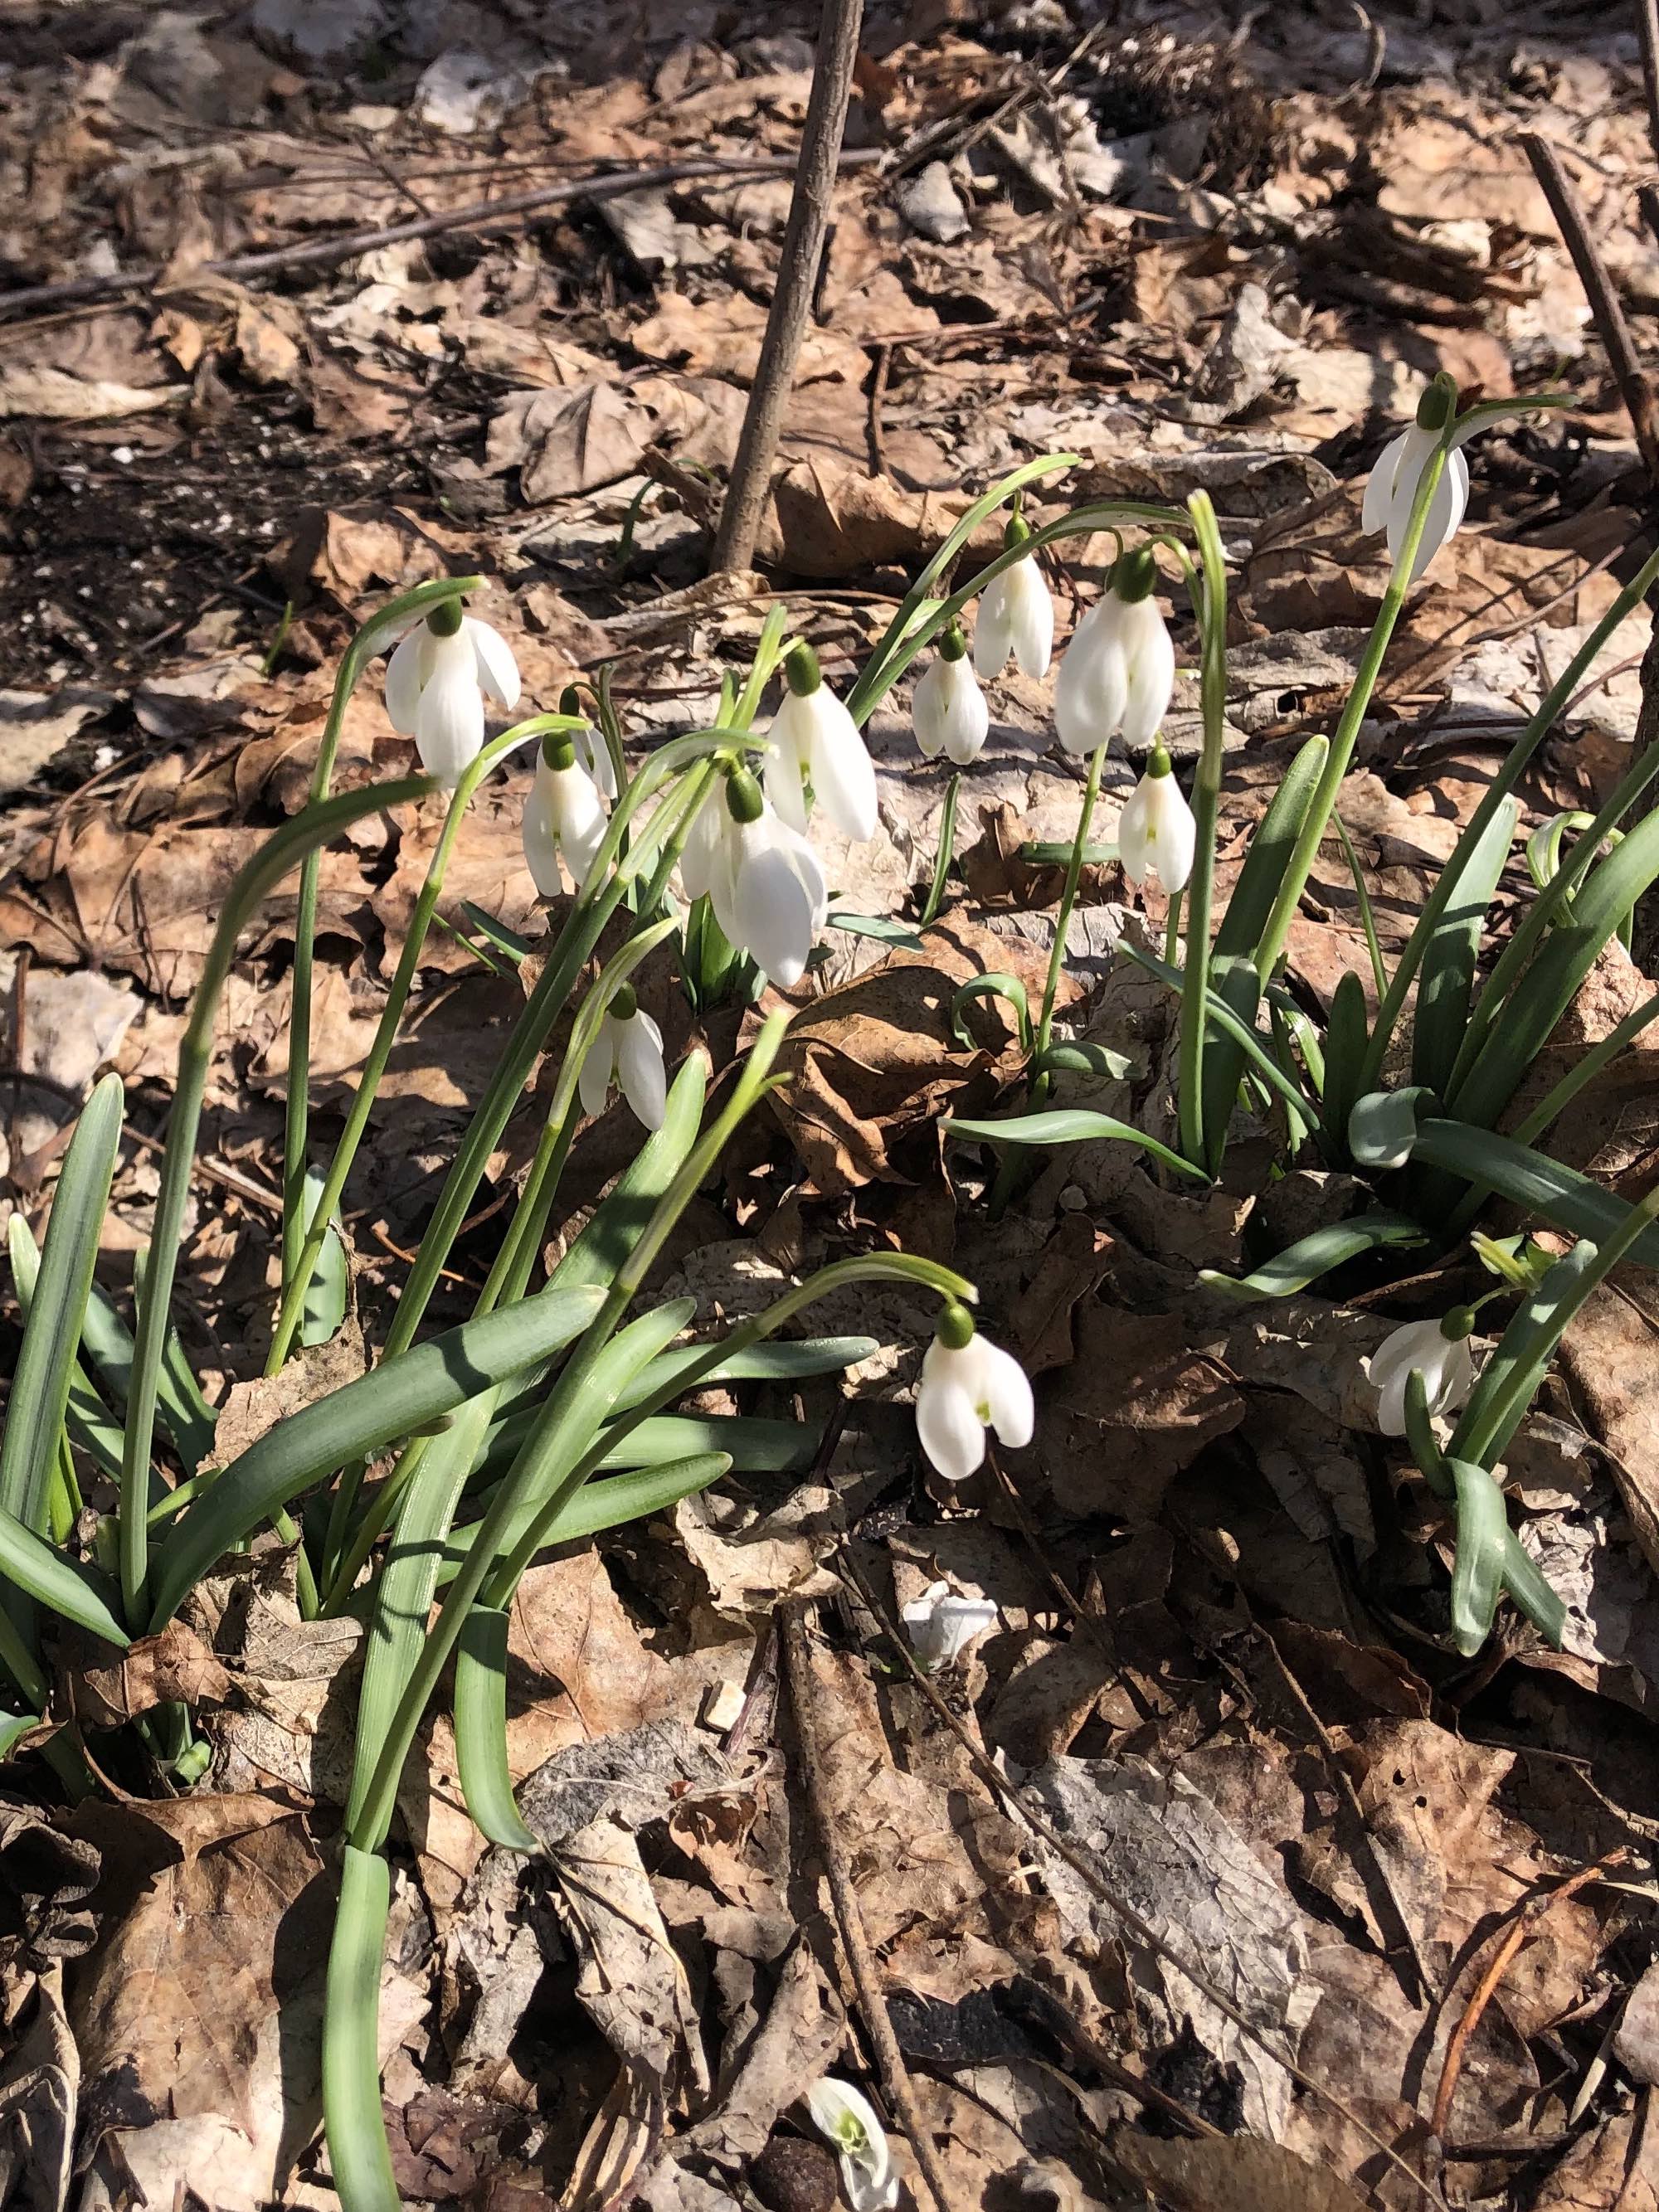 Snowdrops emerging in Madison Wisconsin along Arbor Drive on March1 18, 2021.